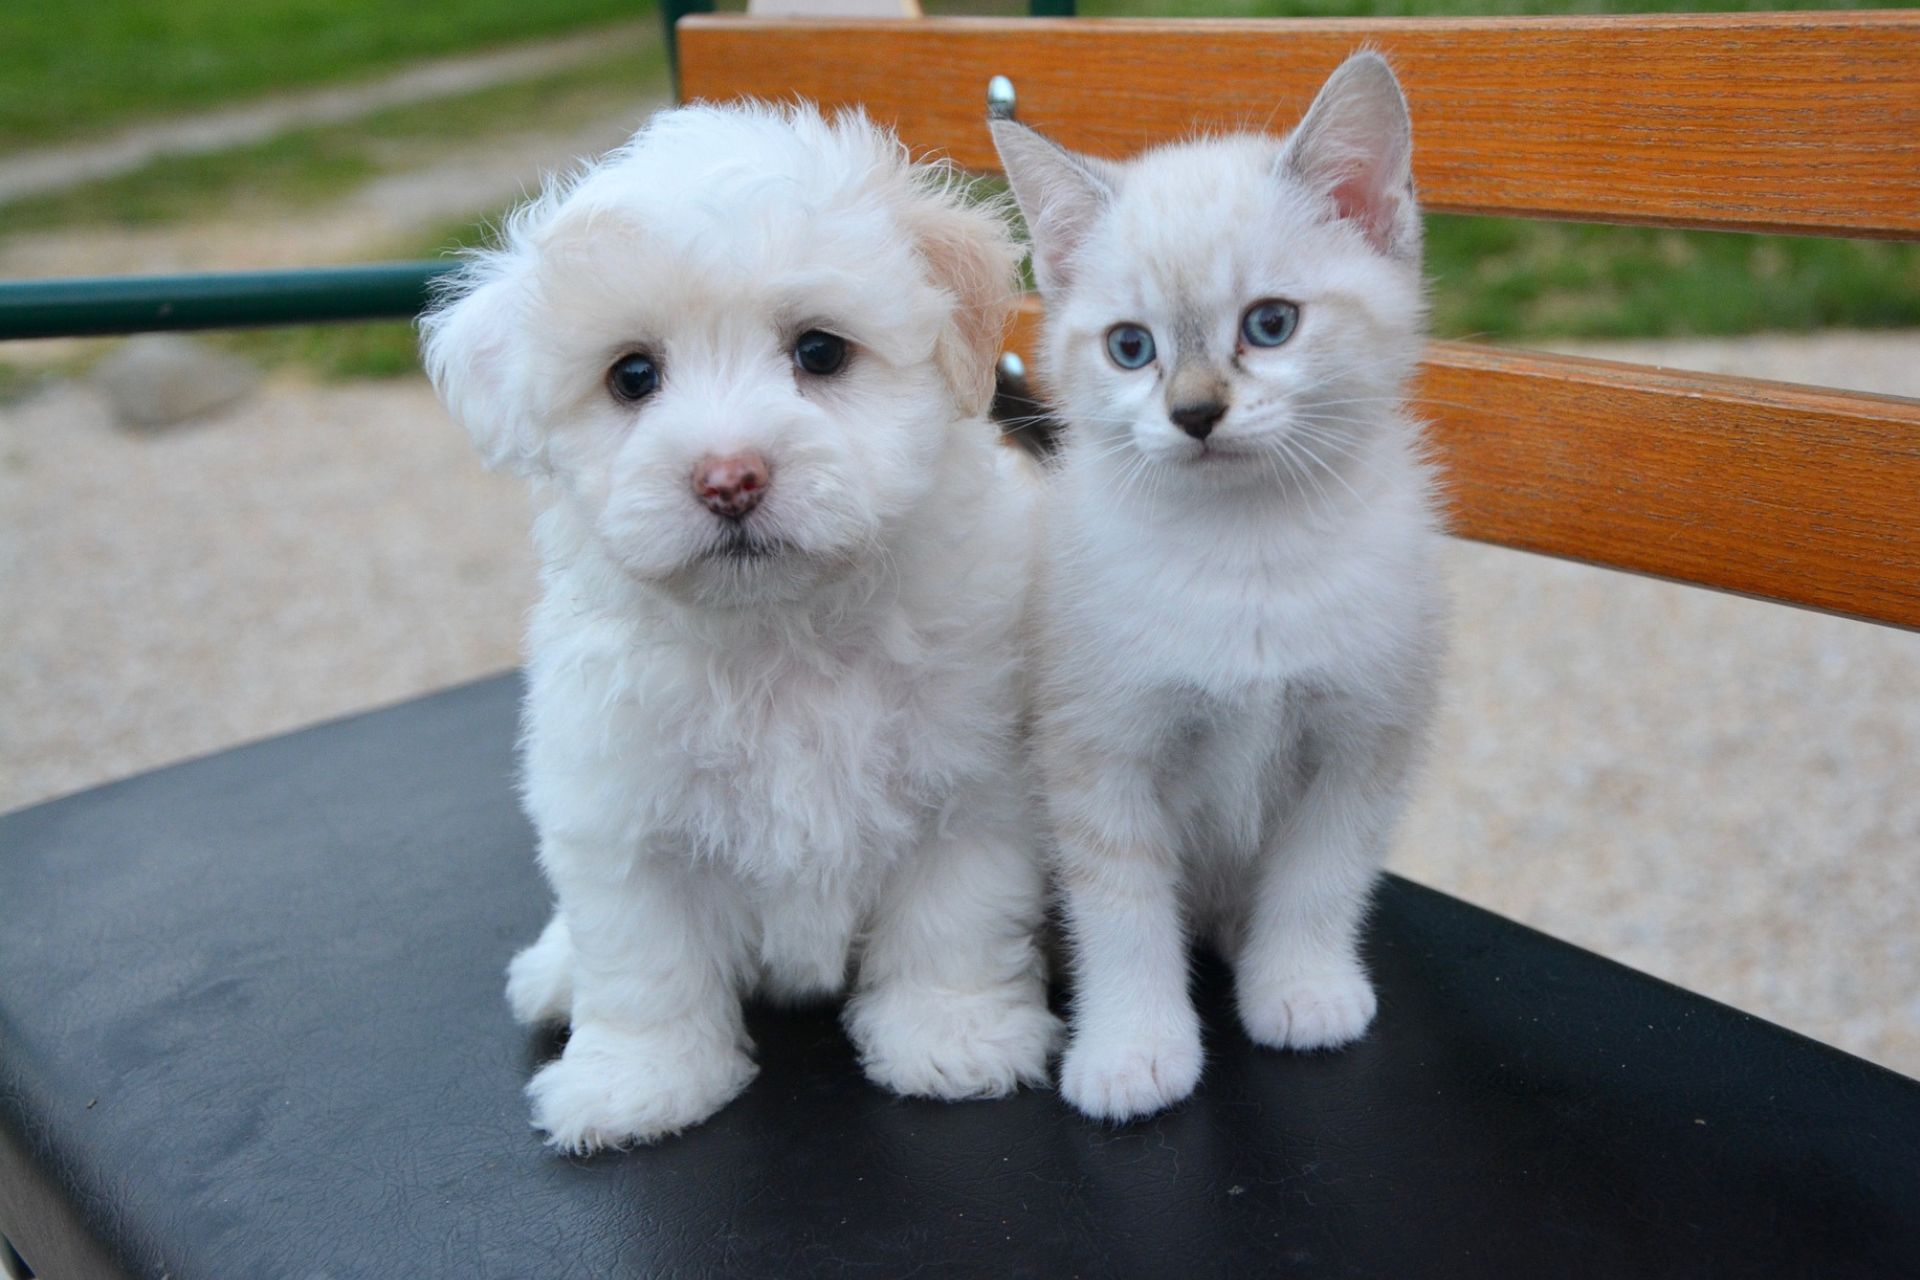 cute puppy & kittin sitting together on a chair